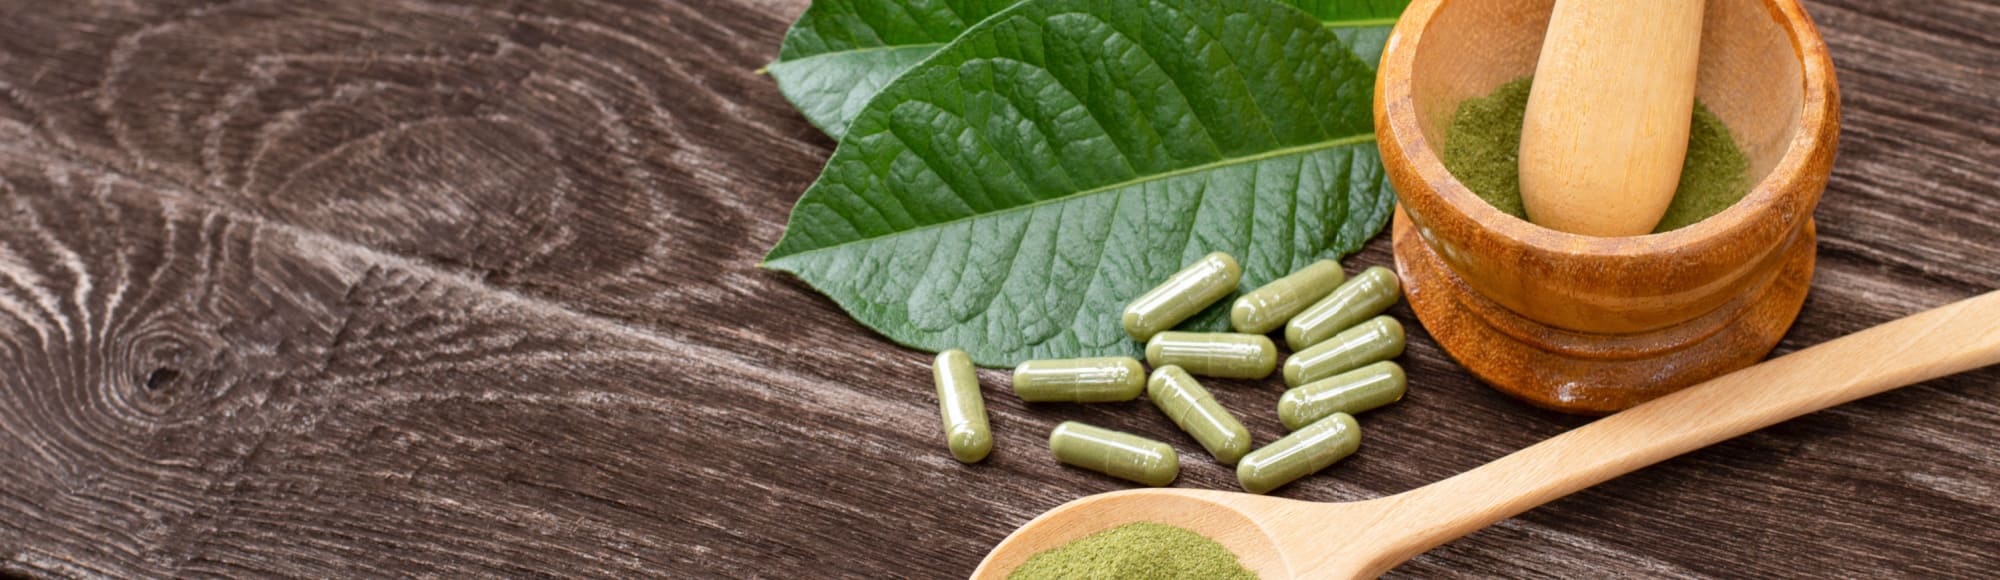 image of health concerns related to kratom use